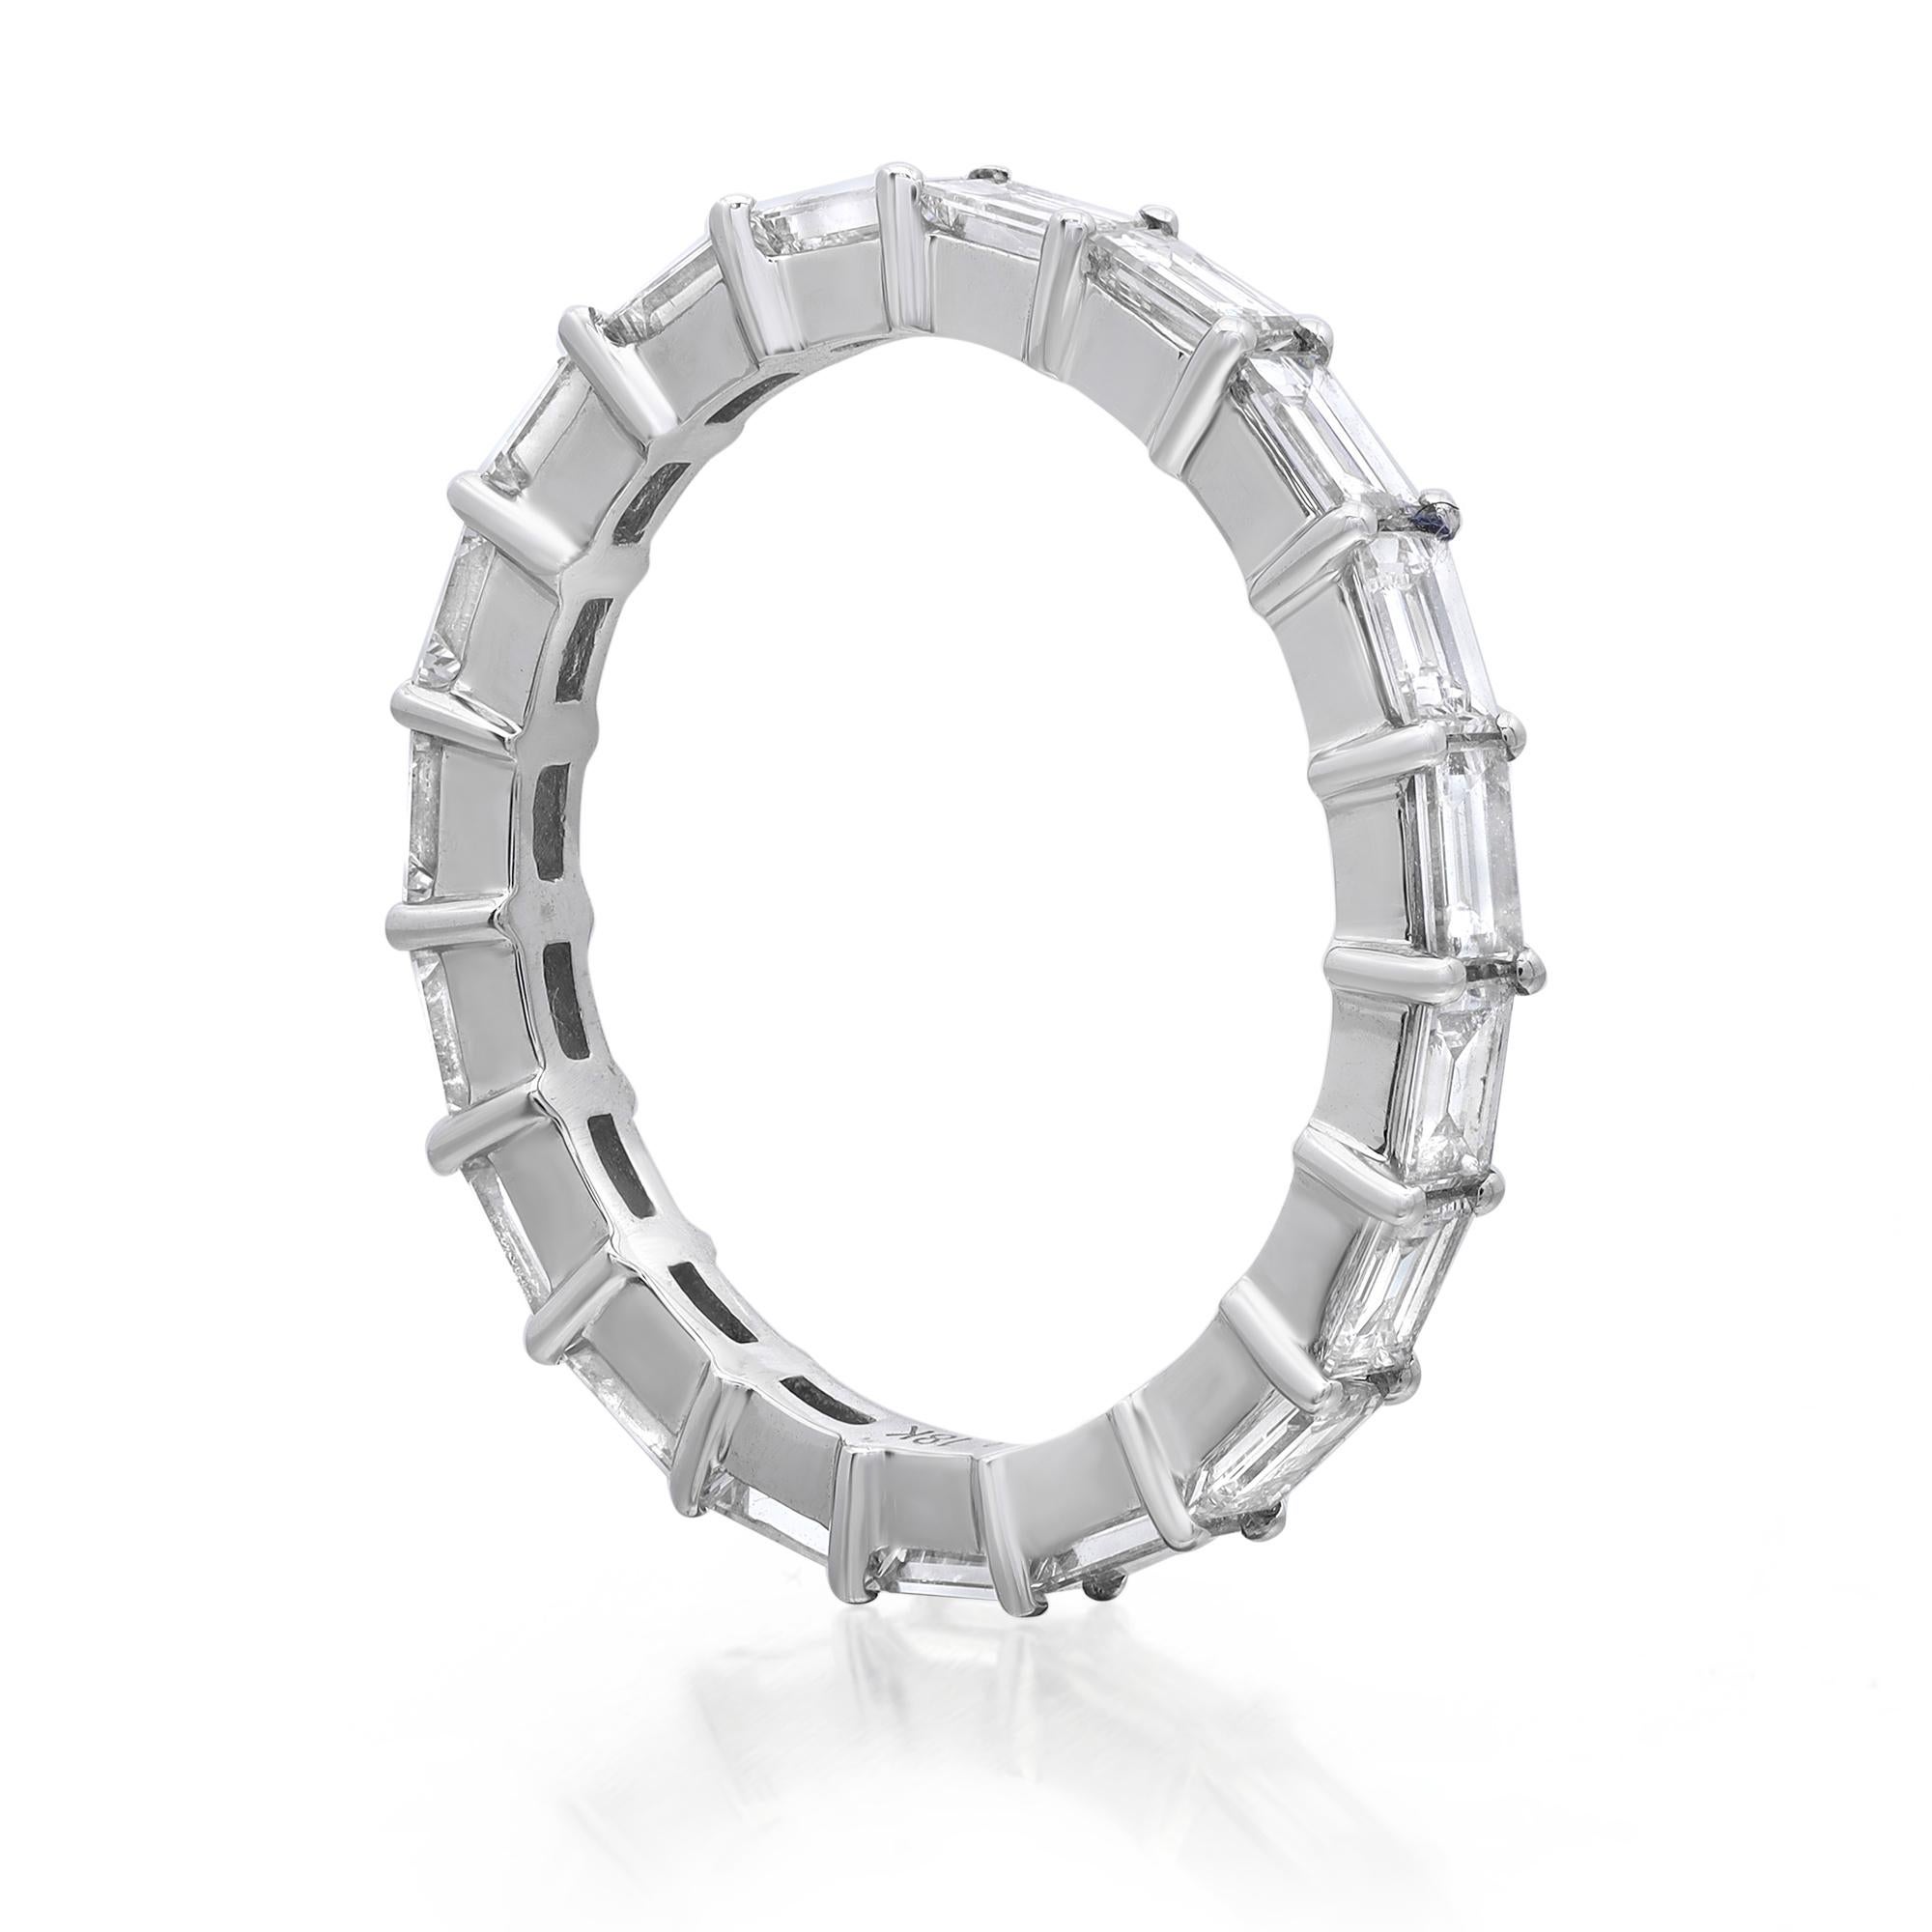 Desirable and unique Rachel Koen slim eternity band ring featuring 19 bright white scintillating Baguette cut diamonds in prong setting. One of a kind handmade stackable stunning beauty. Crafted in 18K white gold. Total diamond weight: 1.45 carats.